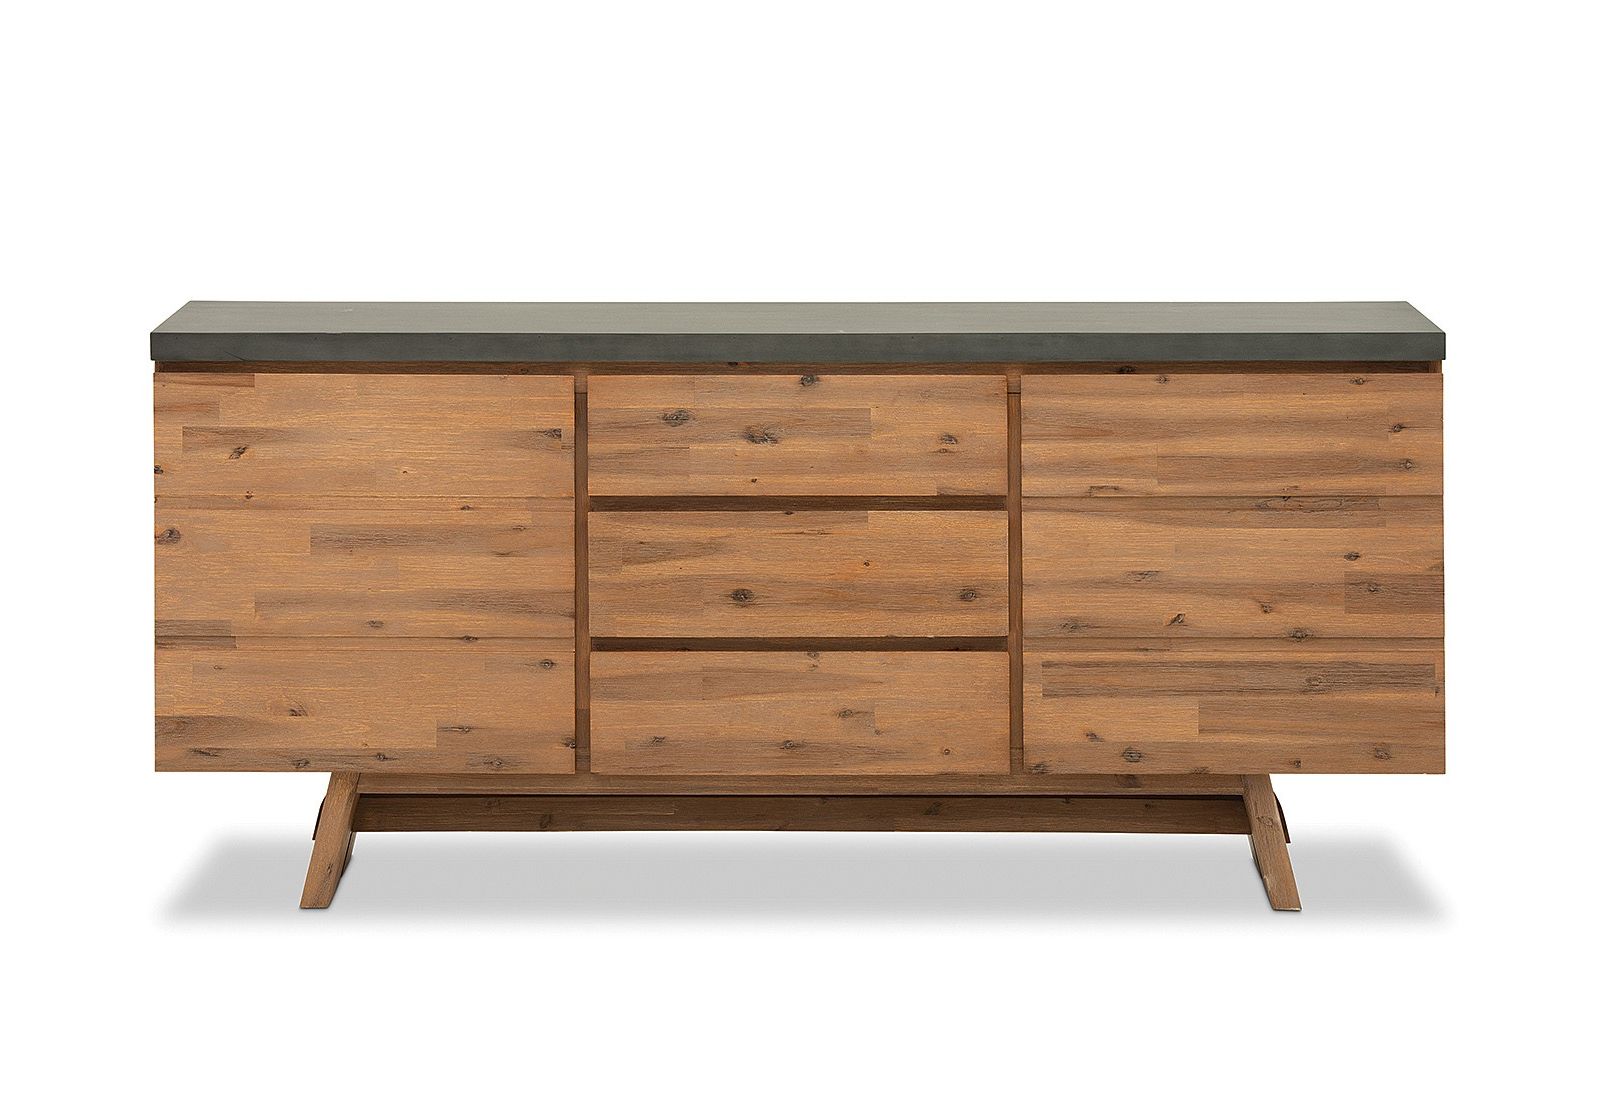 Buffet Tables & Sideboards | Amart Furniture Within Rutherford Sideboards (Gallery 6 of 20)